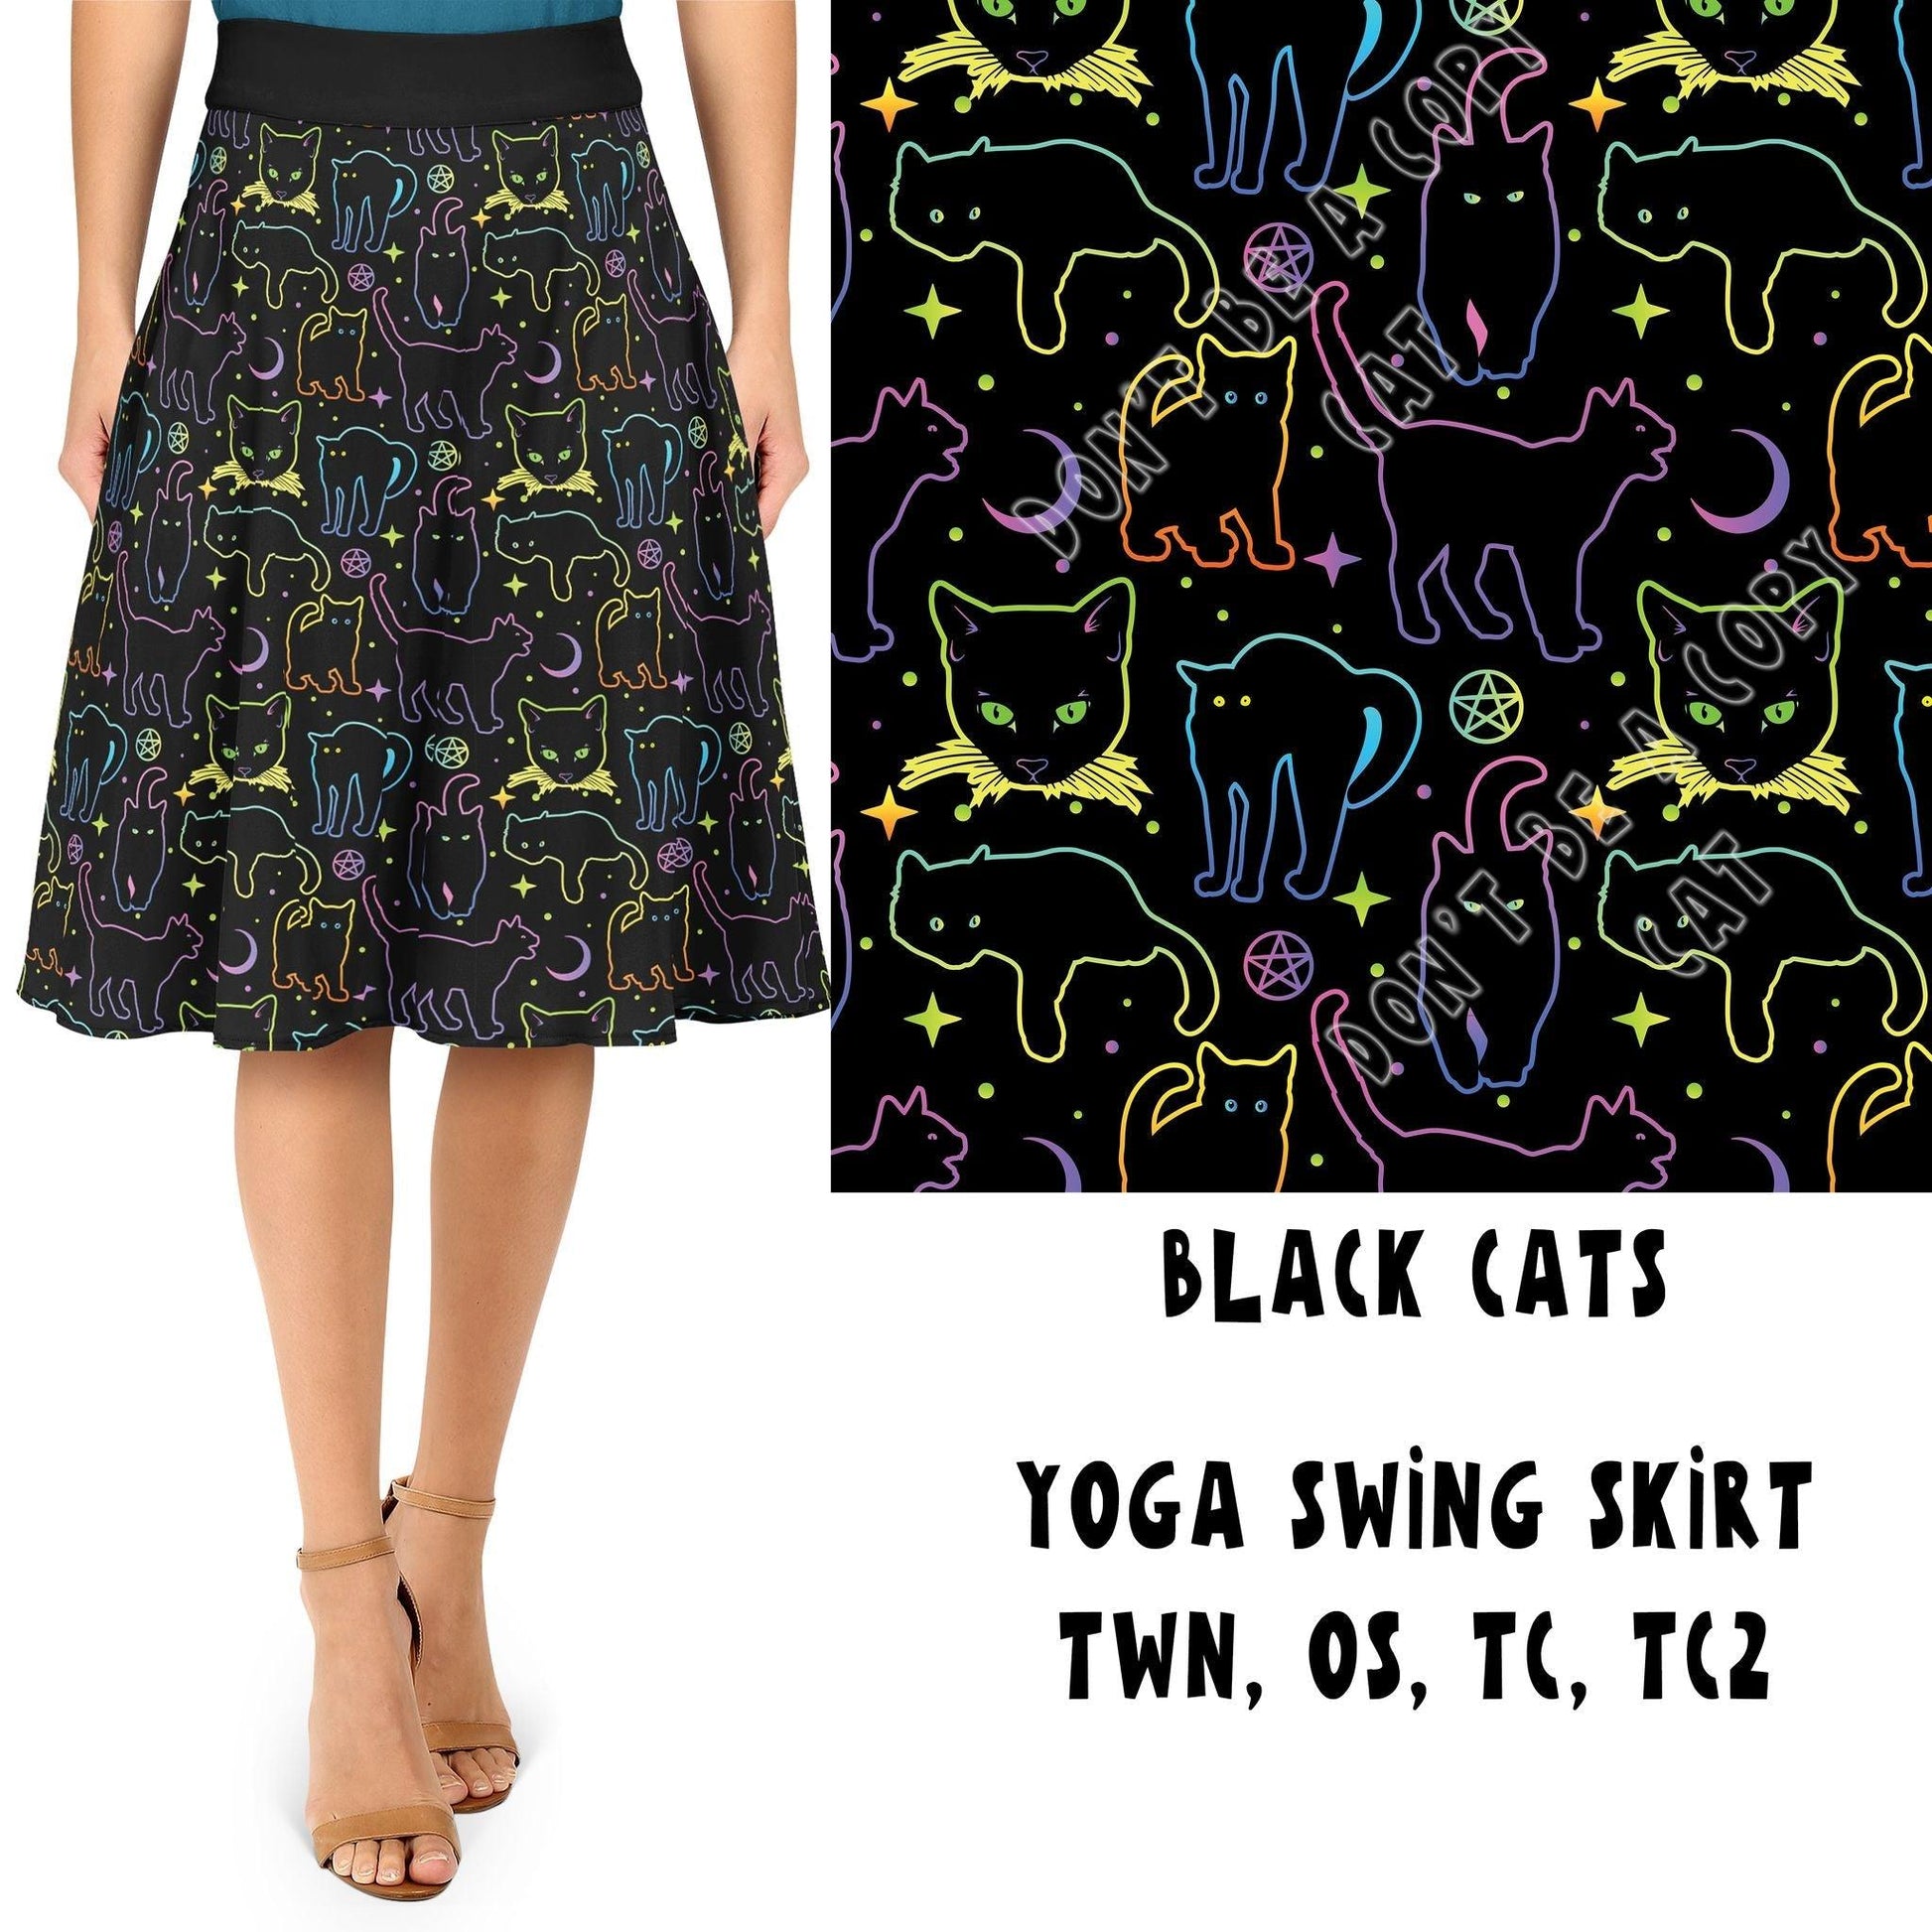 QUICK SPOOKY SWING SKIRT RUN-BLACK CATS - That’s So Fletch Boutique 